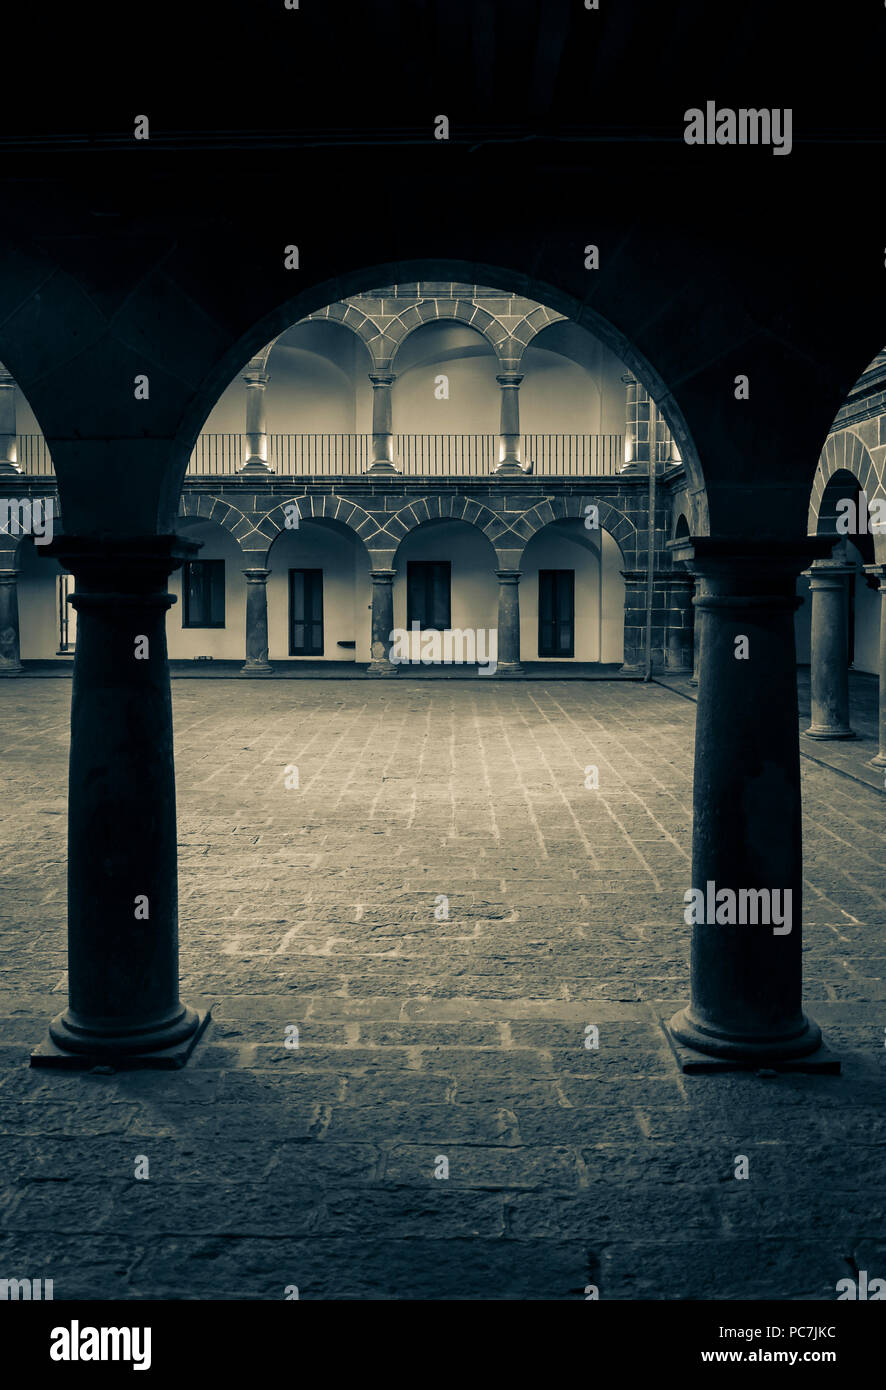 Cloister of San Pedro Art Museum, located in a former 16th-century hospital, Puebla, Mexico Stock Photo